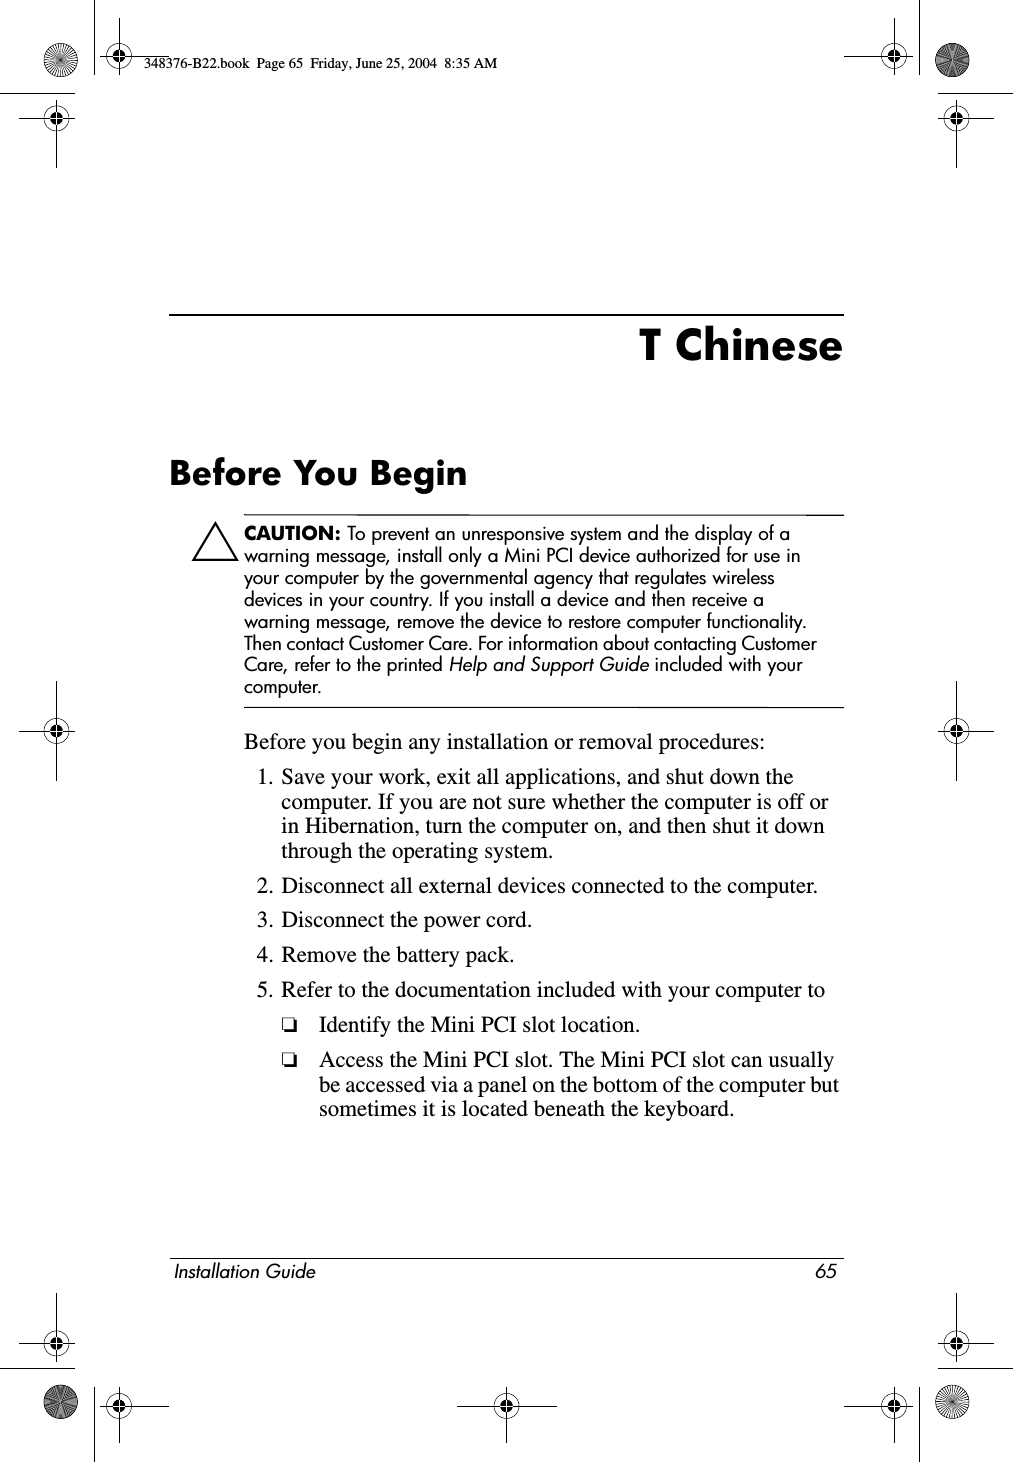 Installation Guide 65T ChineseBefore You BeginÄCAUTION: To prevent an unresponsive system and the display of a warning message, install only a Mini PCI device authorized for use in your computer by the governmental agency that regulates wireless devices in your country. If you install a device and then receive a warning message, remove the device to restore computer functionality. Then contact Customer Care. For information about contacting Customer Care, refer to the printed Help and Support Guide included with your computer.Before you begin any installation or removal procedures:1. Save your work, exit all applications, and shut down the computer. If you are not sure whether the computer is off or in Hibernation, turn the computer on, and then shut it down through the operating system.2. Disconnect all external devices connected to the computer.3. Disconnect the power cord.4. Remove the battery pack.5. Refer to the documentation included with your computer to❏Identify the Mini PCI slot location.❏Access the Mini PCI slot. The Mini PCI slot can usually be accessed via a panel on the bottom of the computer but sometimes it is located beneath the keyboard.348376-B22.book  Page 65  Friday, June 25, 2004  8:35 AM